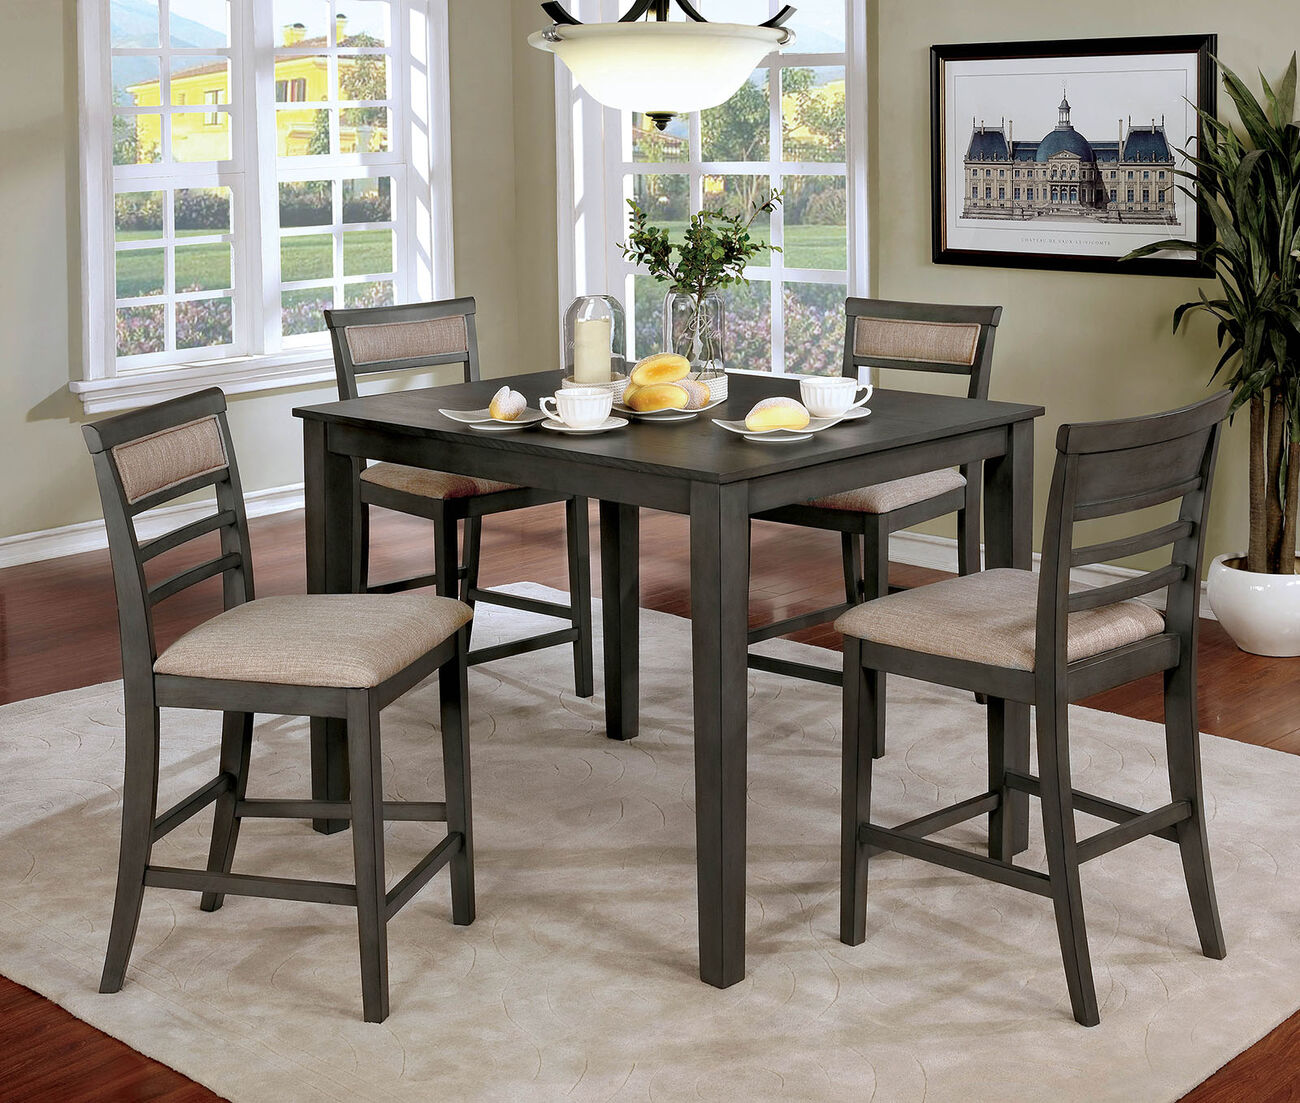 5-Piece Wooden Counter Height Table Set In Brown